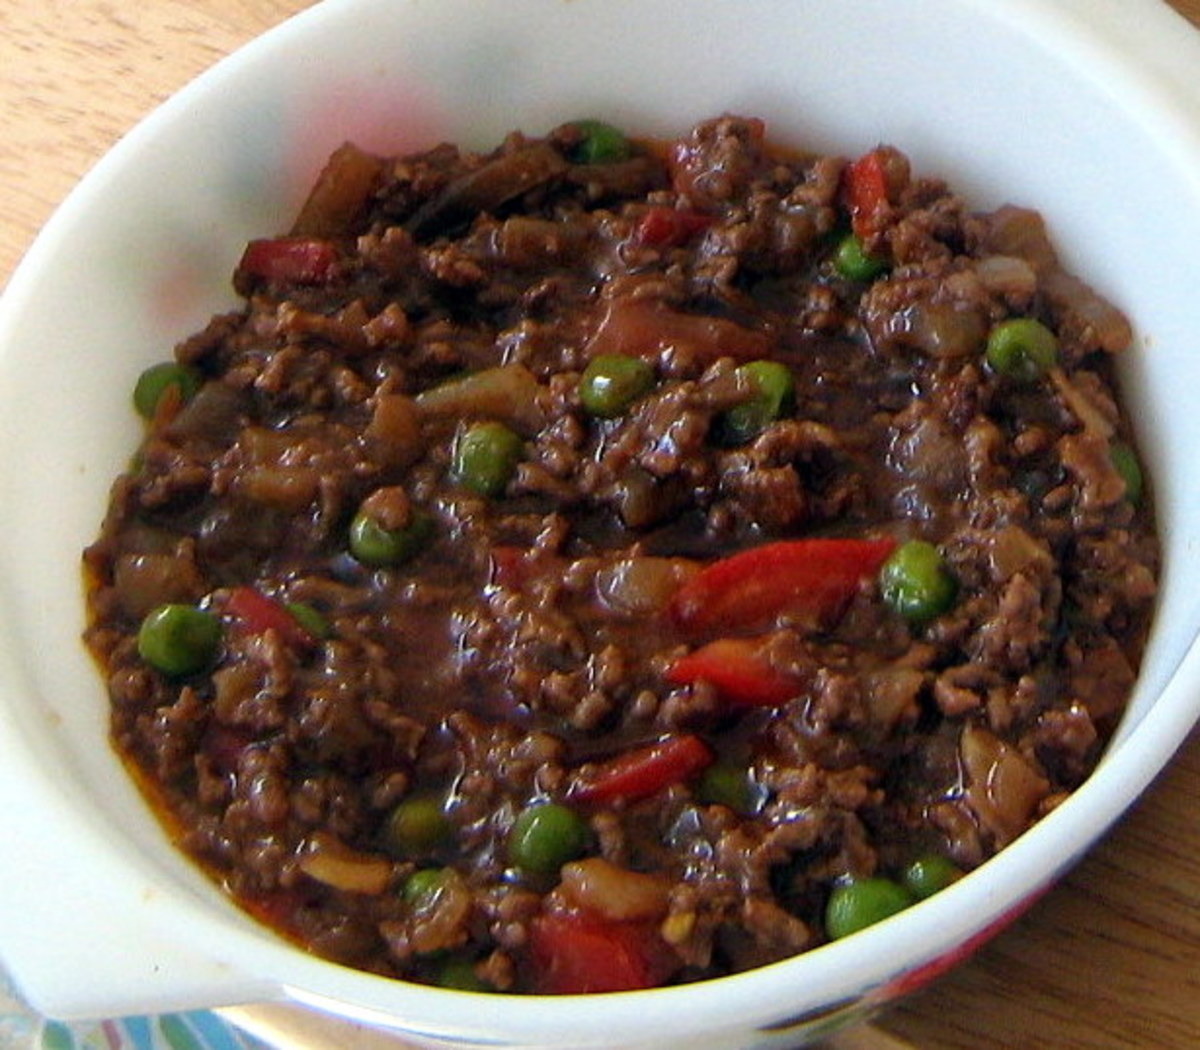 Delicious bowl of ground beef stew